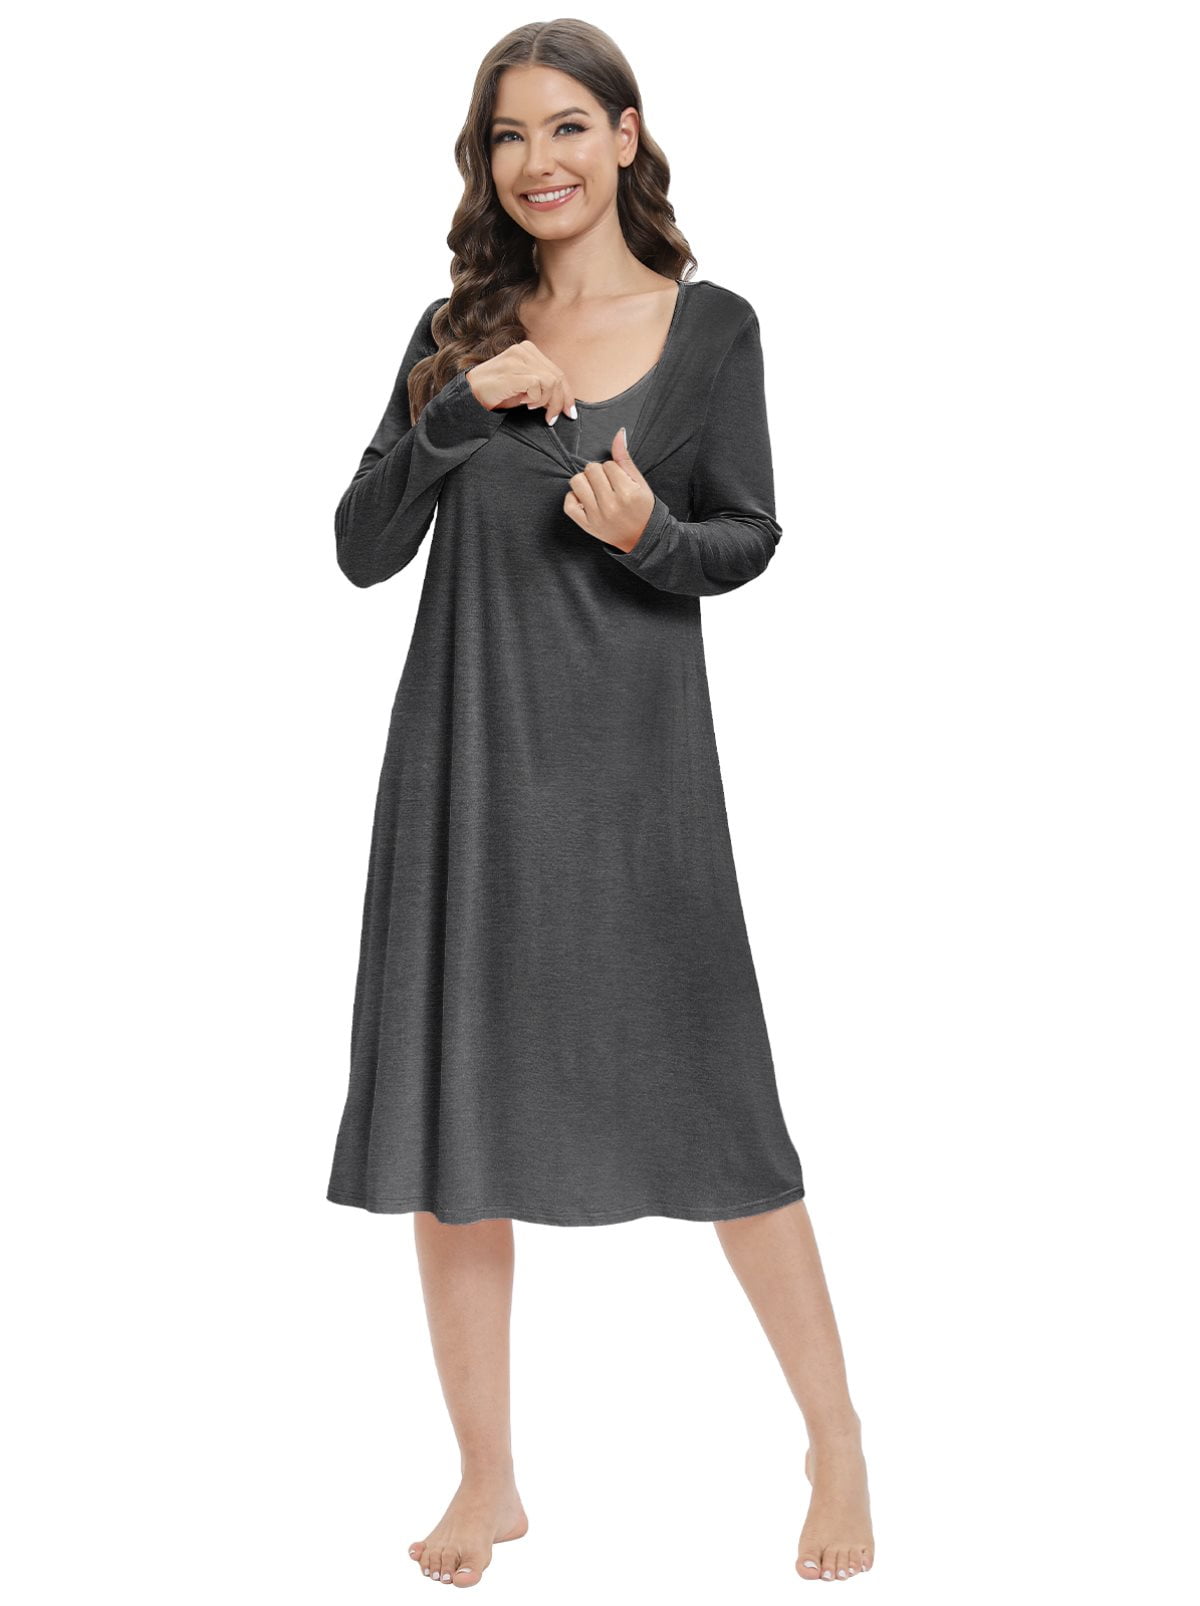 EFINNY Women's Super Soft Modal Nightgown Long Sleeve Sleepwear Comfy  Loungewear Mid-Length Nightshirt with Chest Pads S-XXL (Removable Chest  Pads)